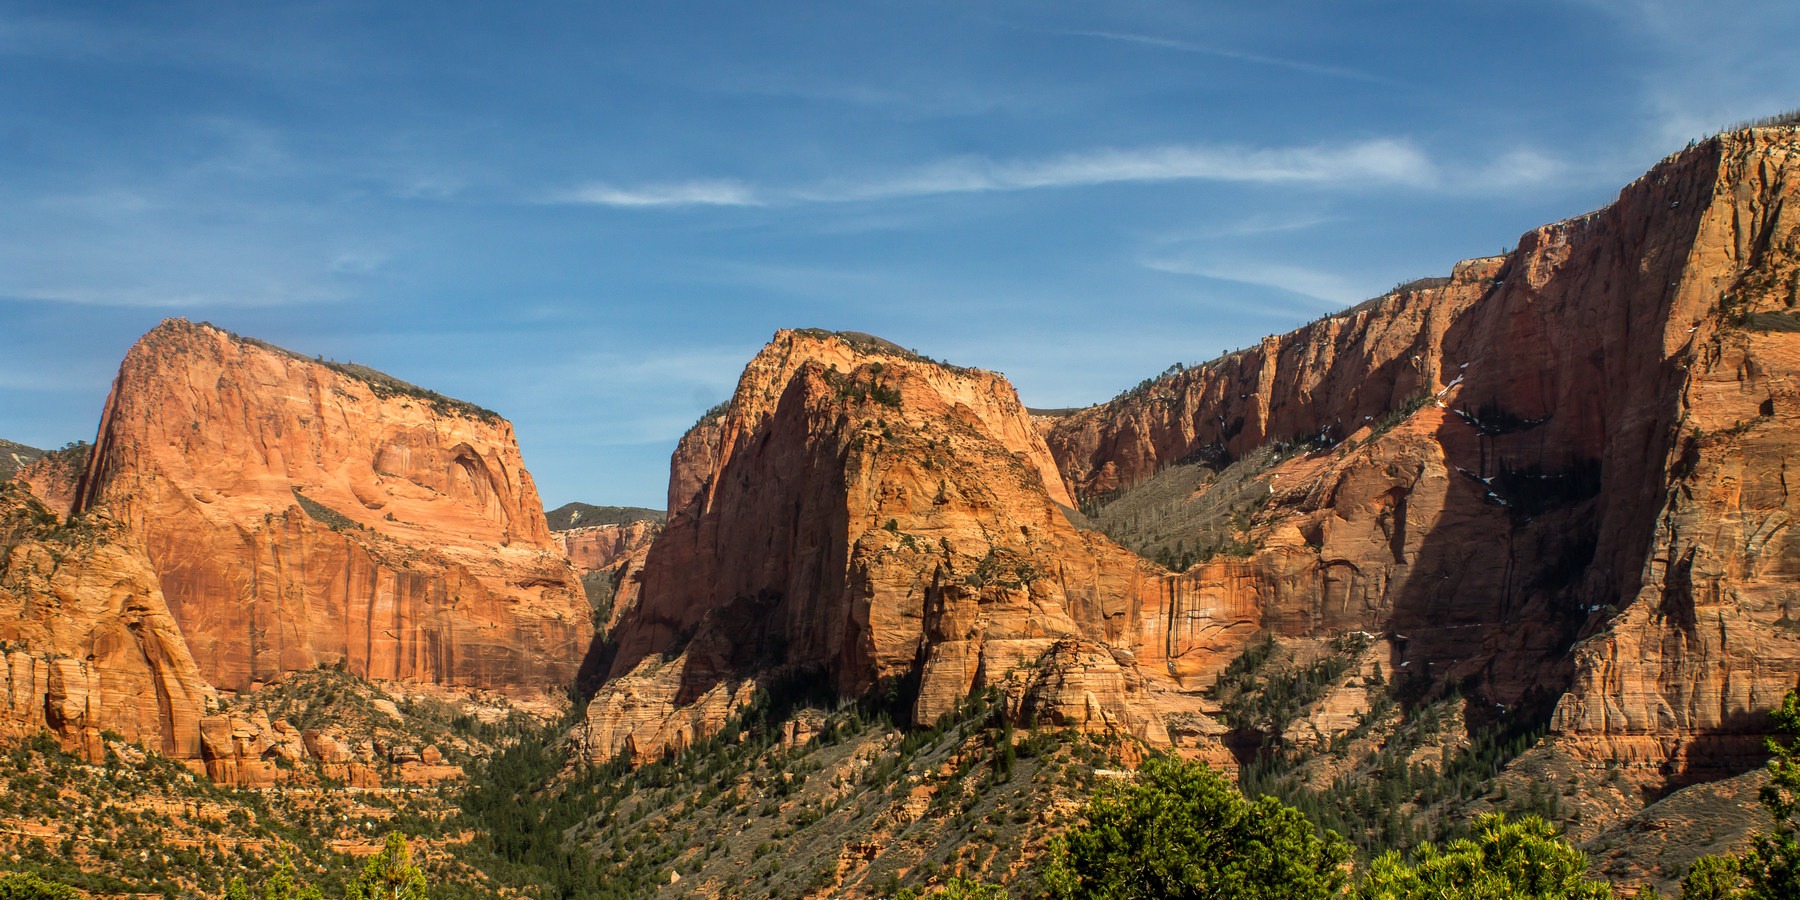 Kolob Canyons Viewpoint + Timber Creek Overlook Trail | Outdoor Project